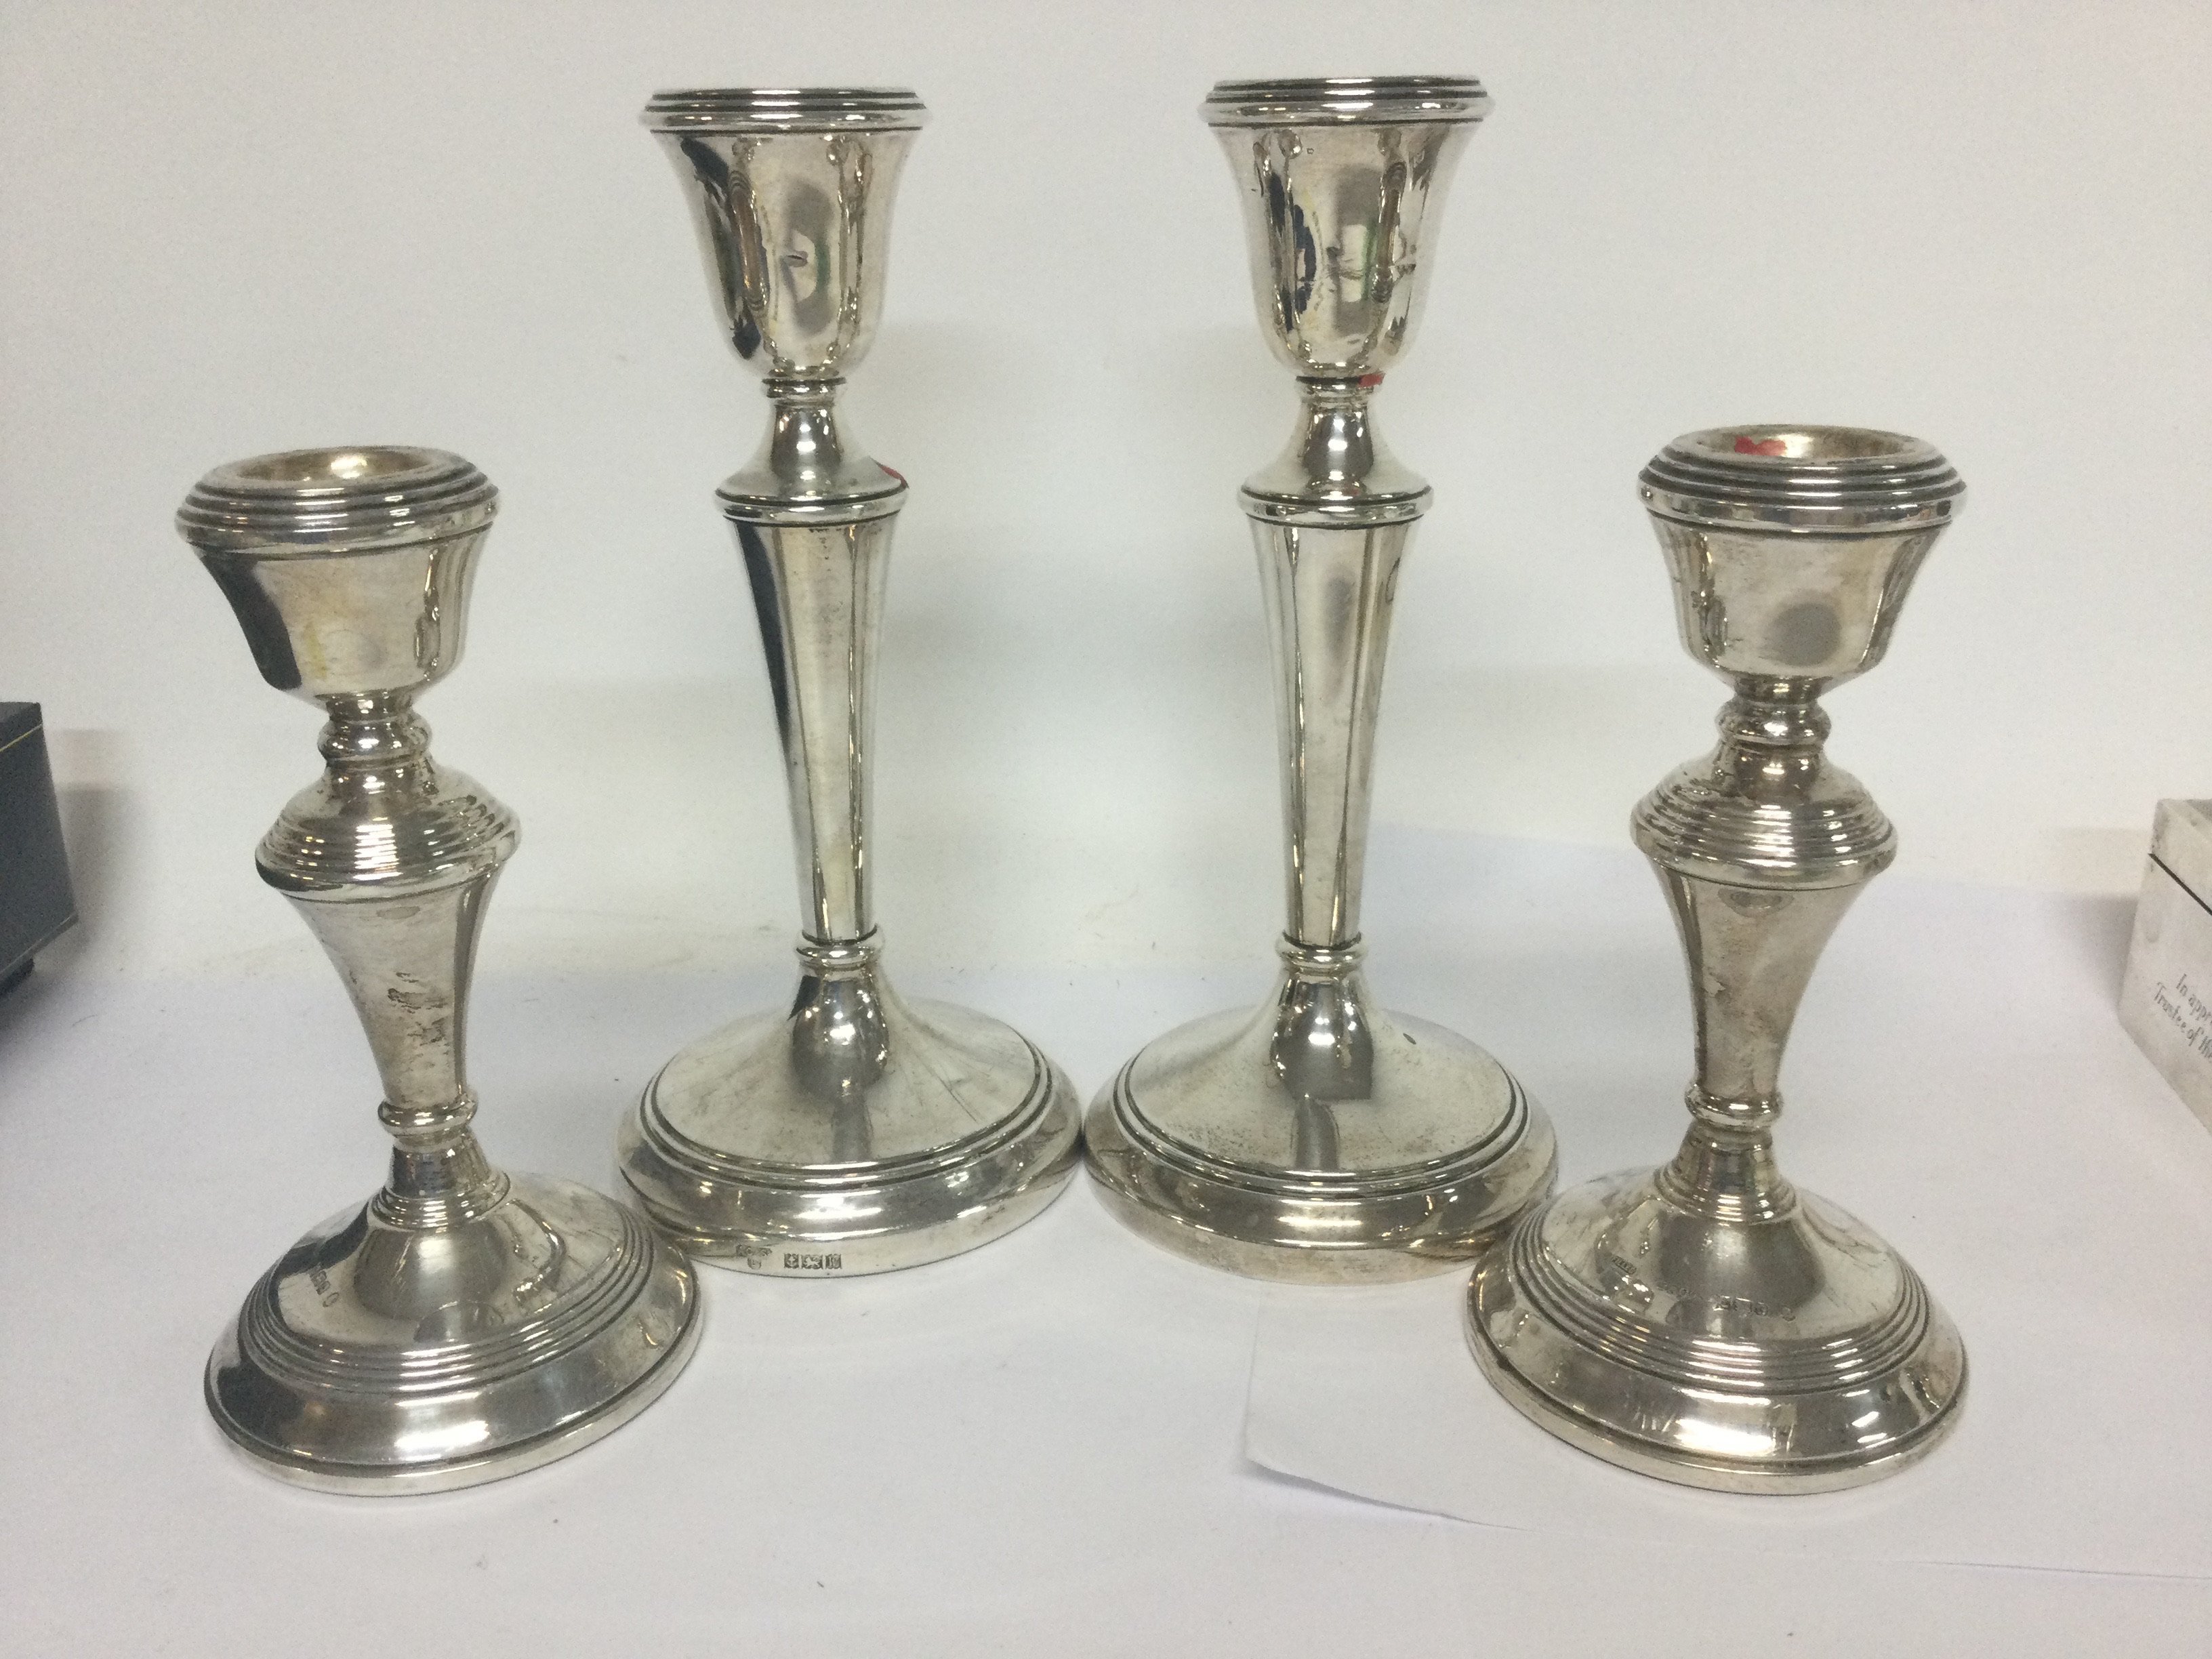 Two pairs of silver candle sticks Birmingham hallm